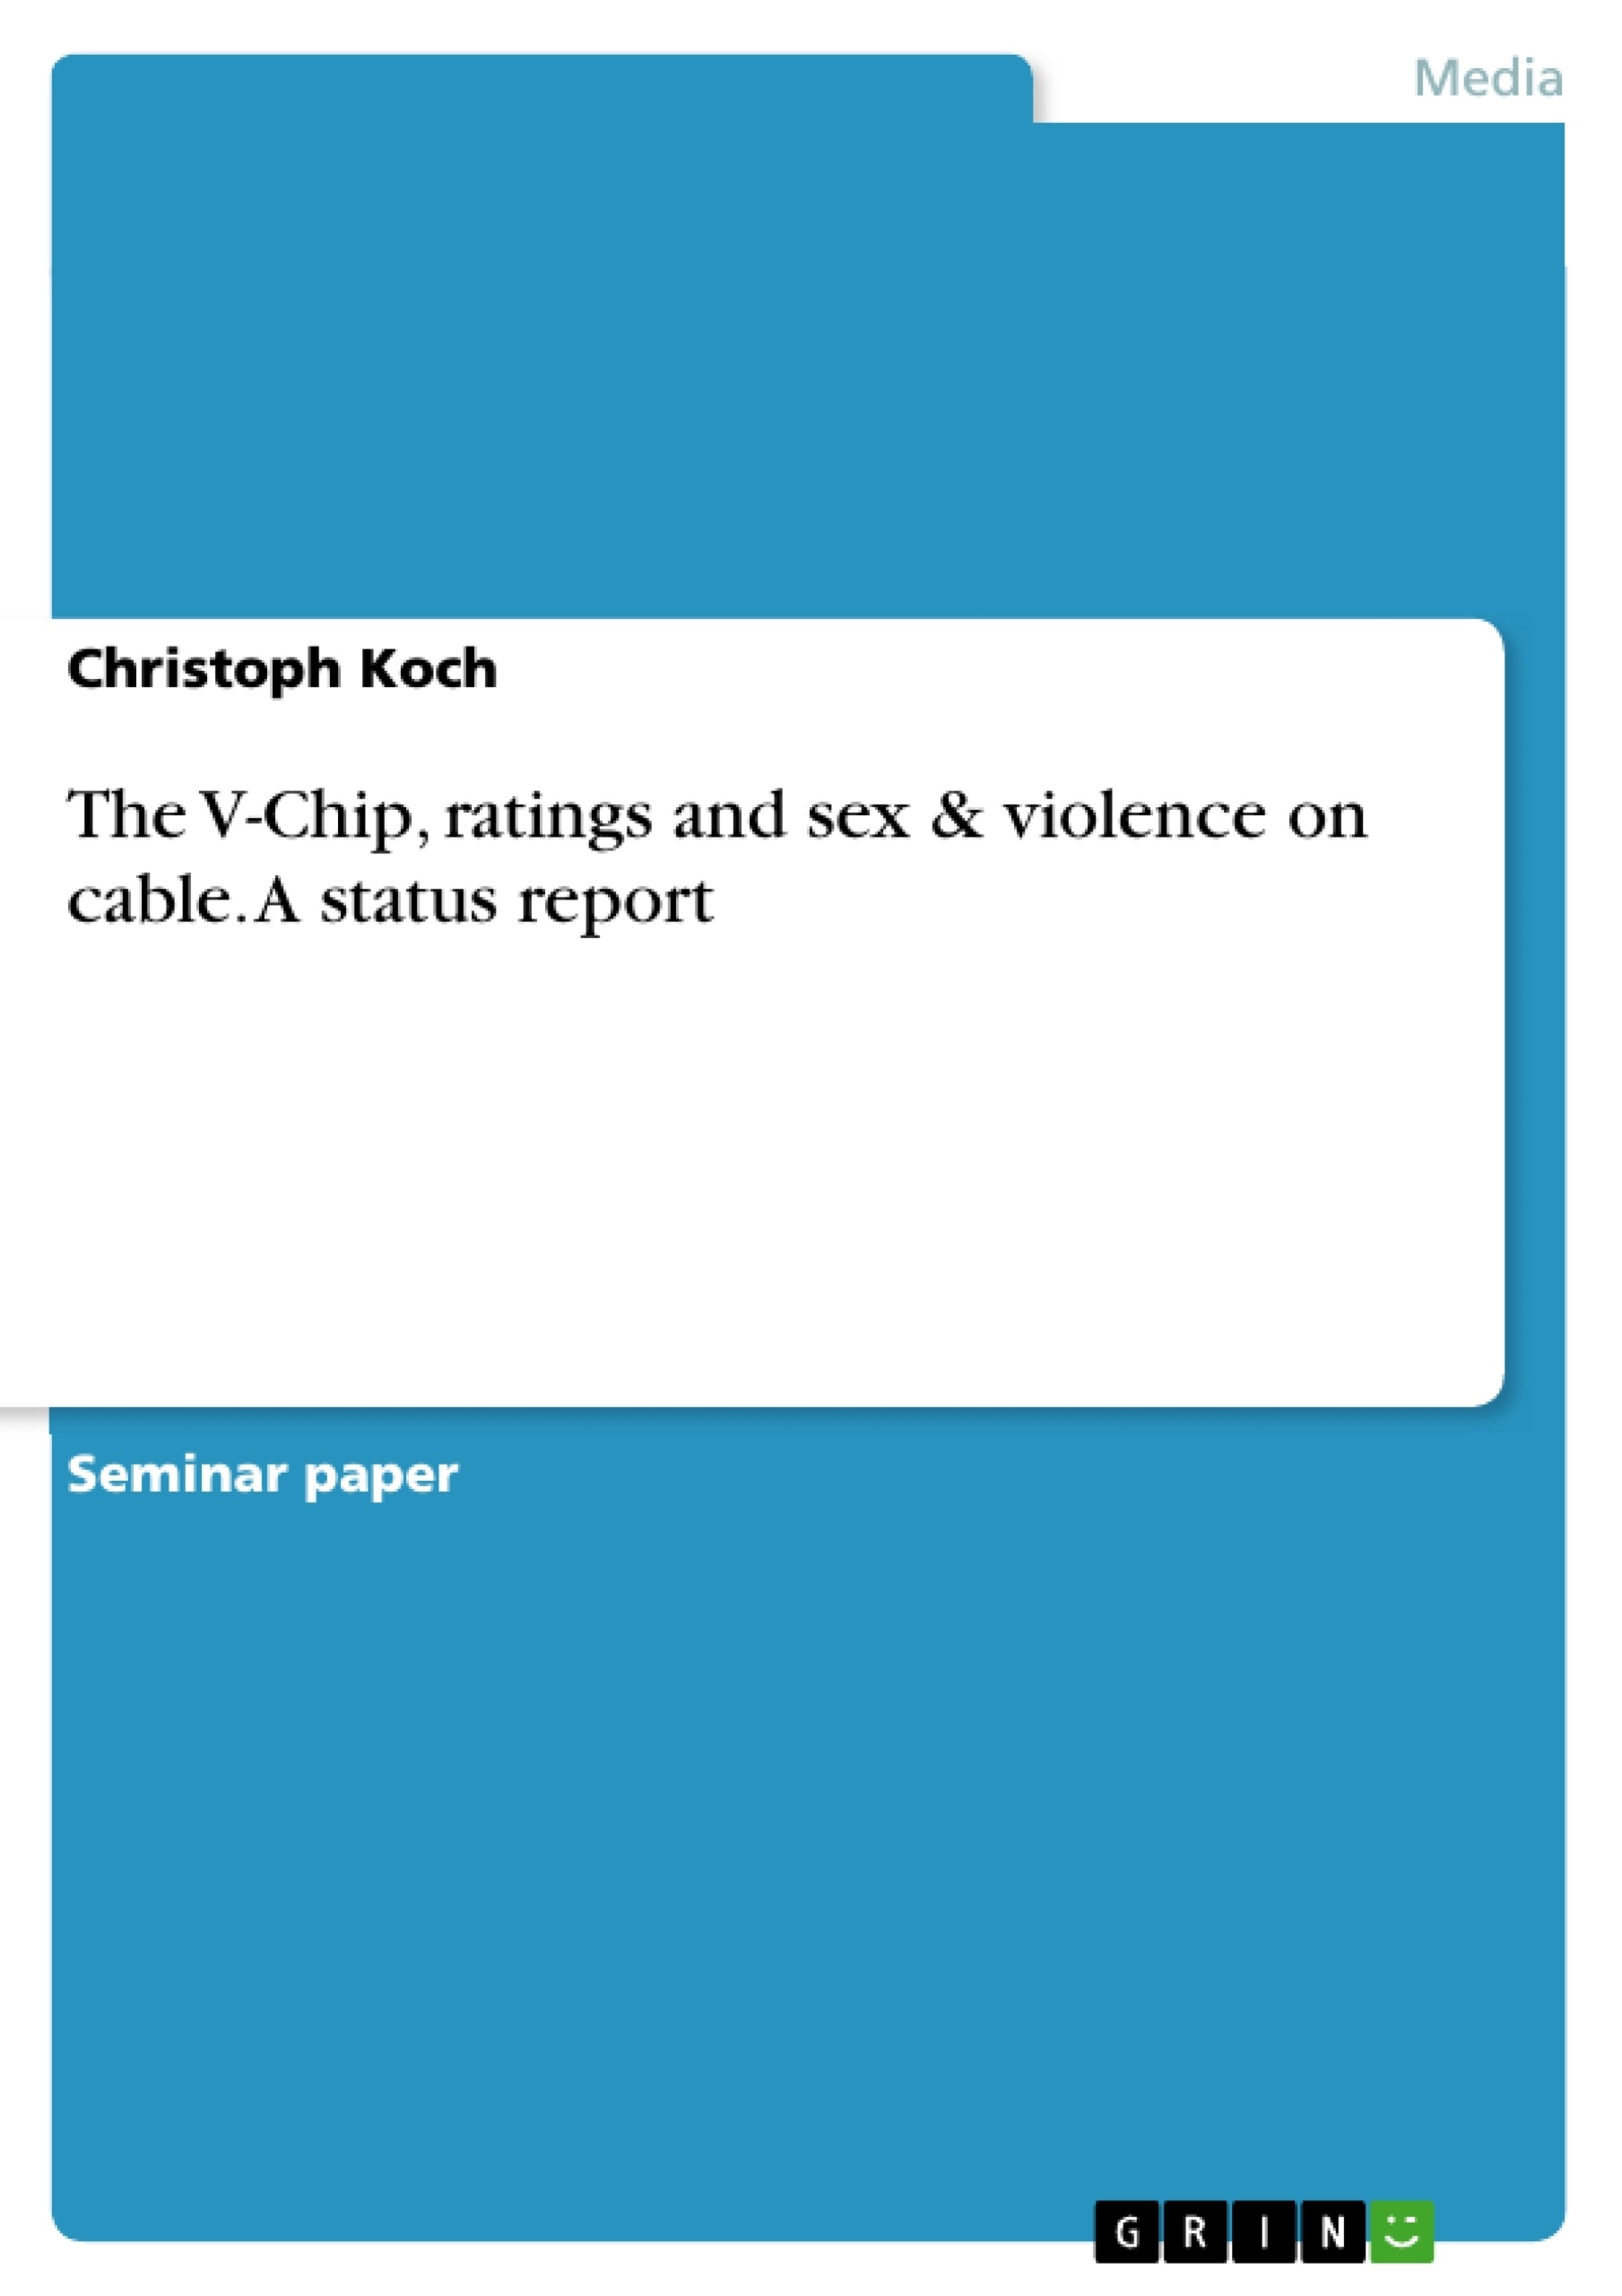 Title: The V-Chip, ratings and sex & violence on cable. A status report